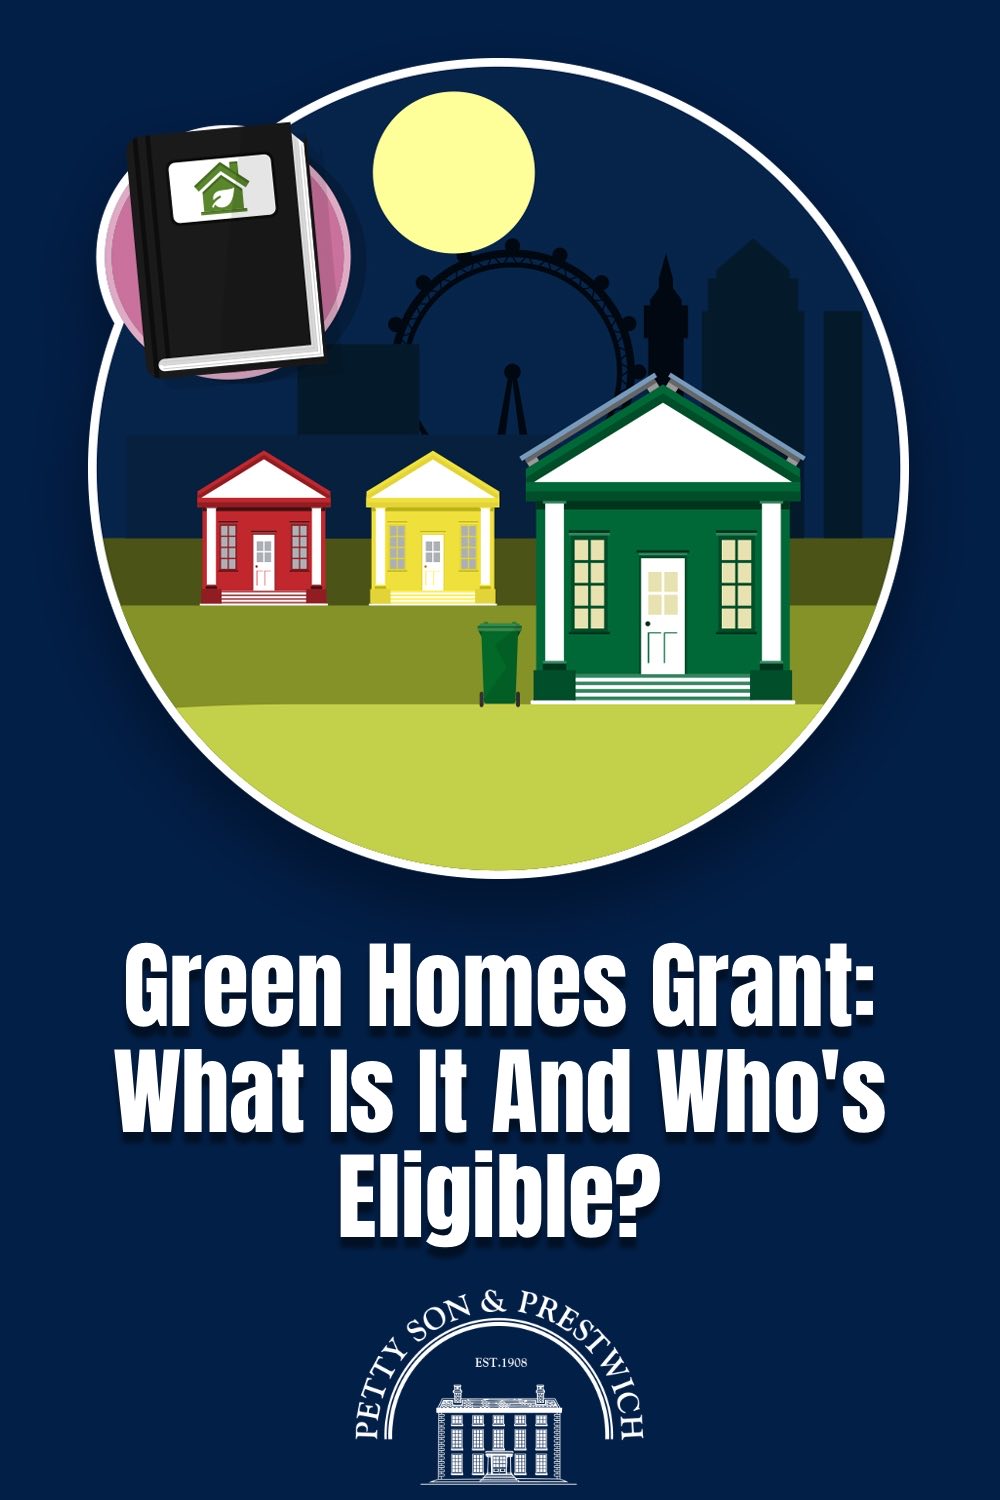 the green homes grant